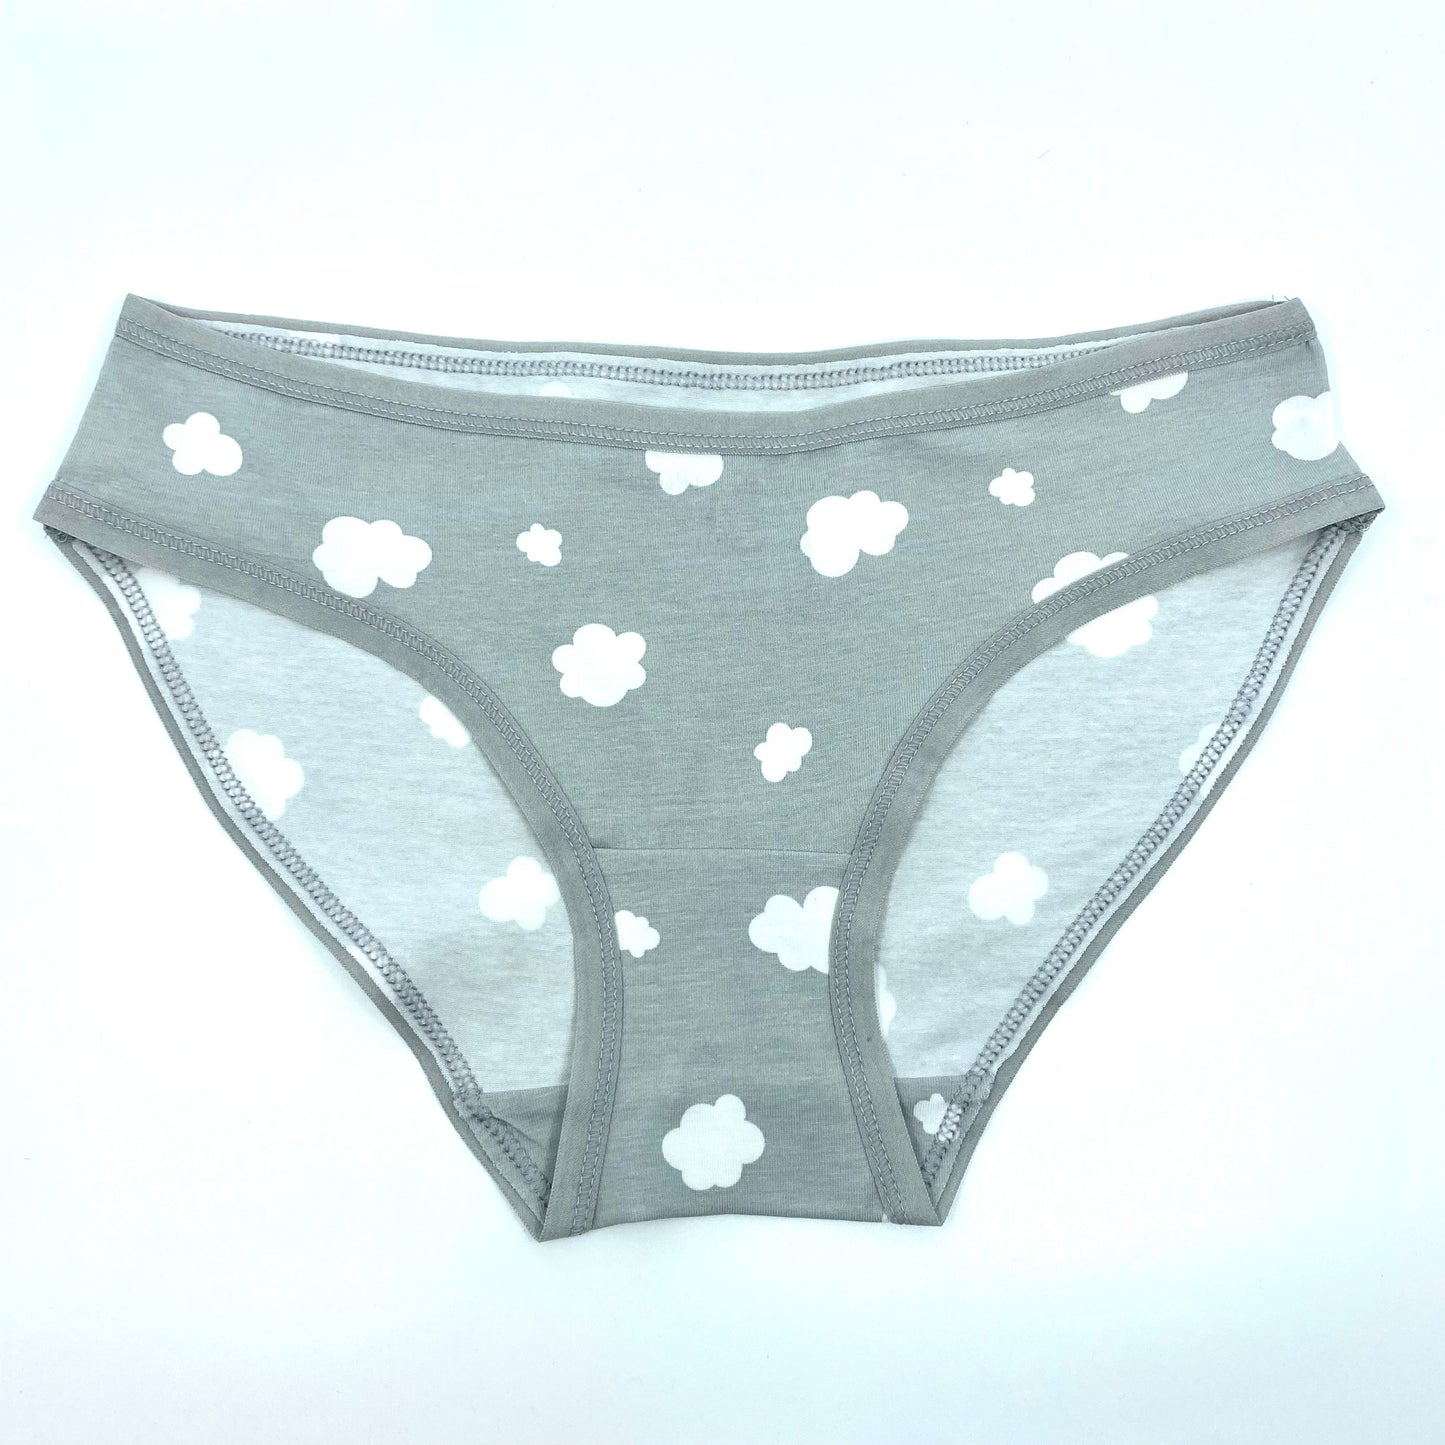 Girls' organic cotton knickers - grey with white clouds